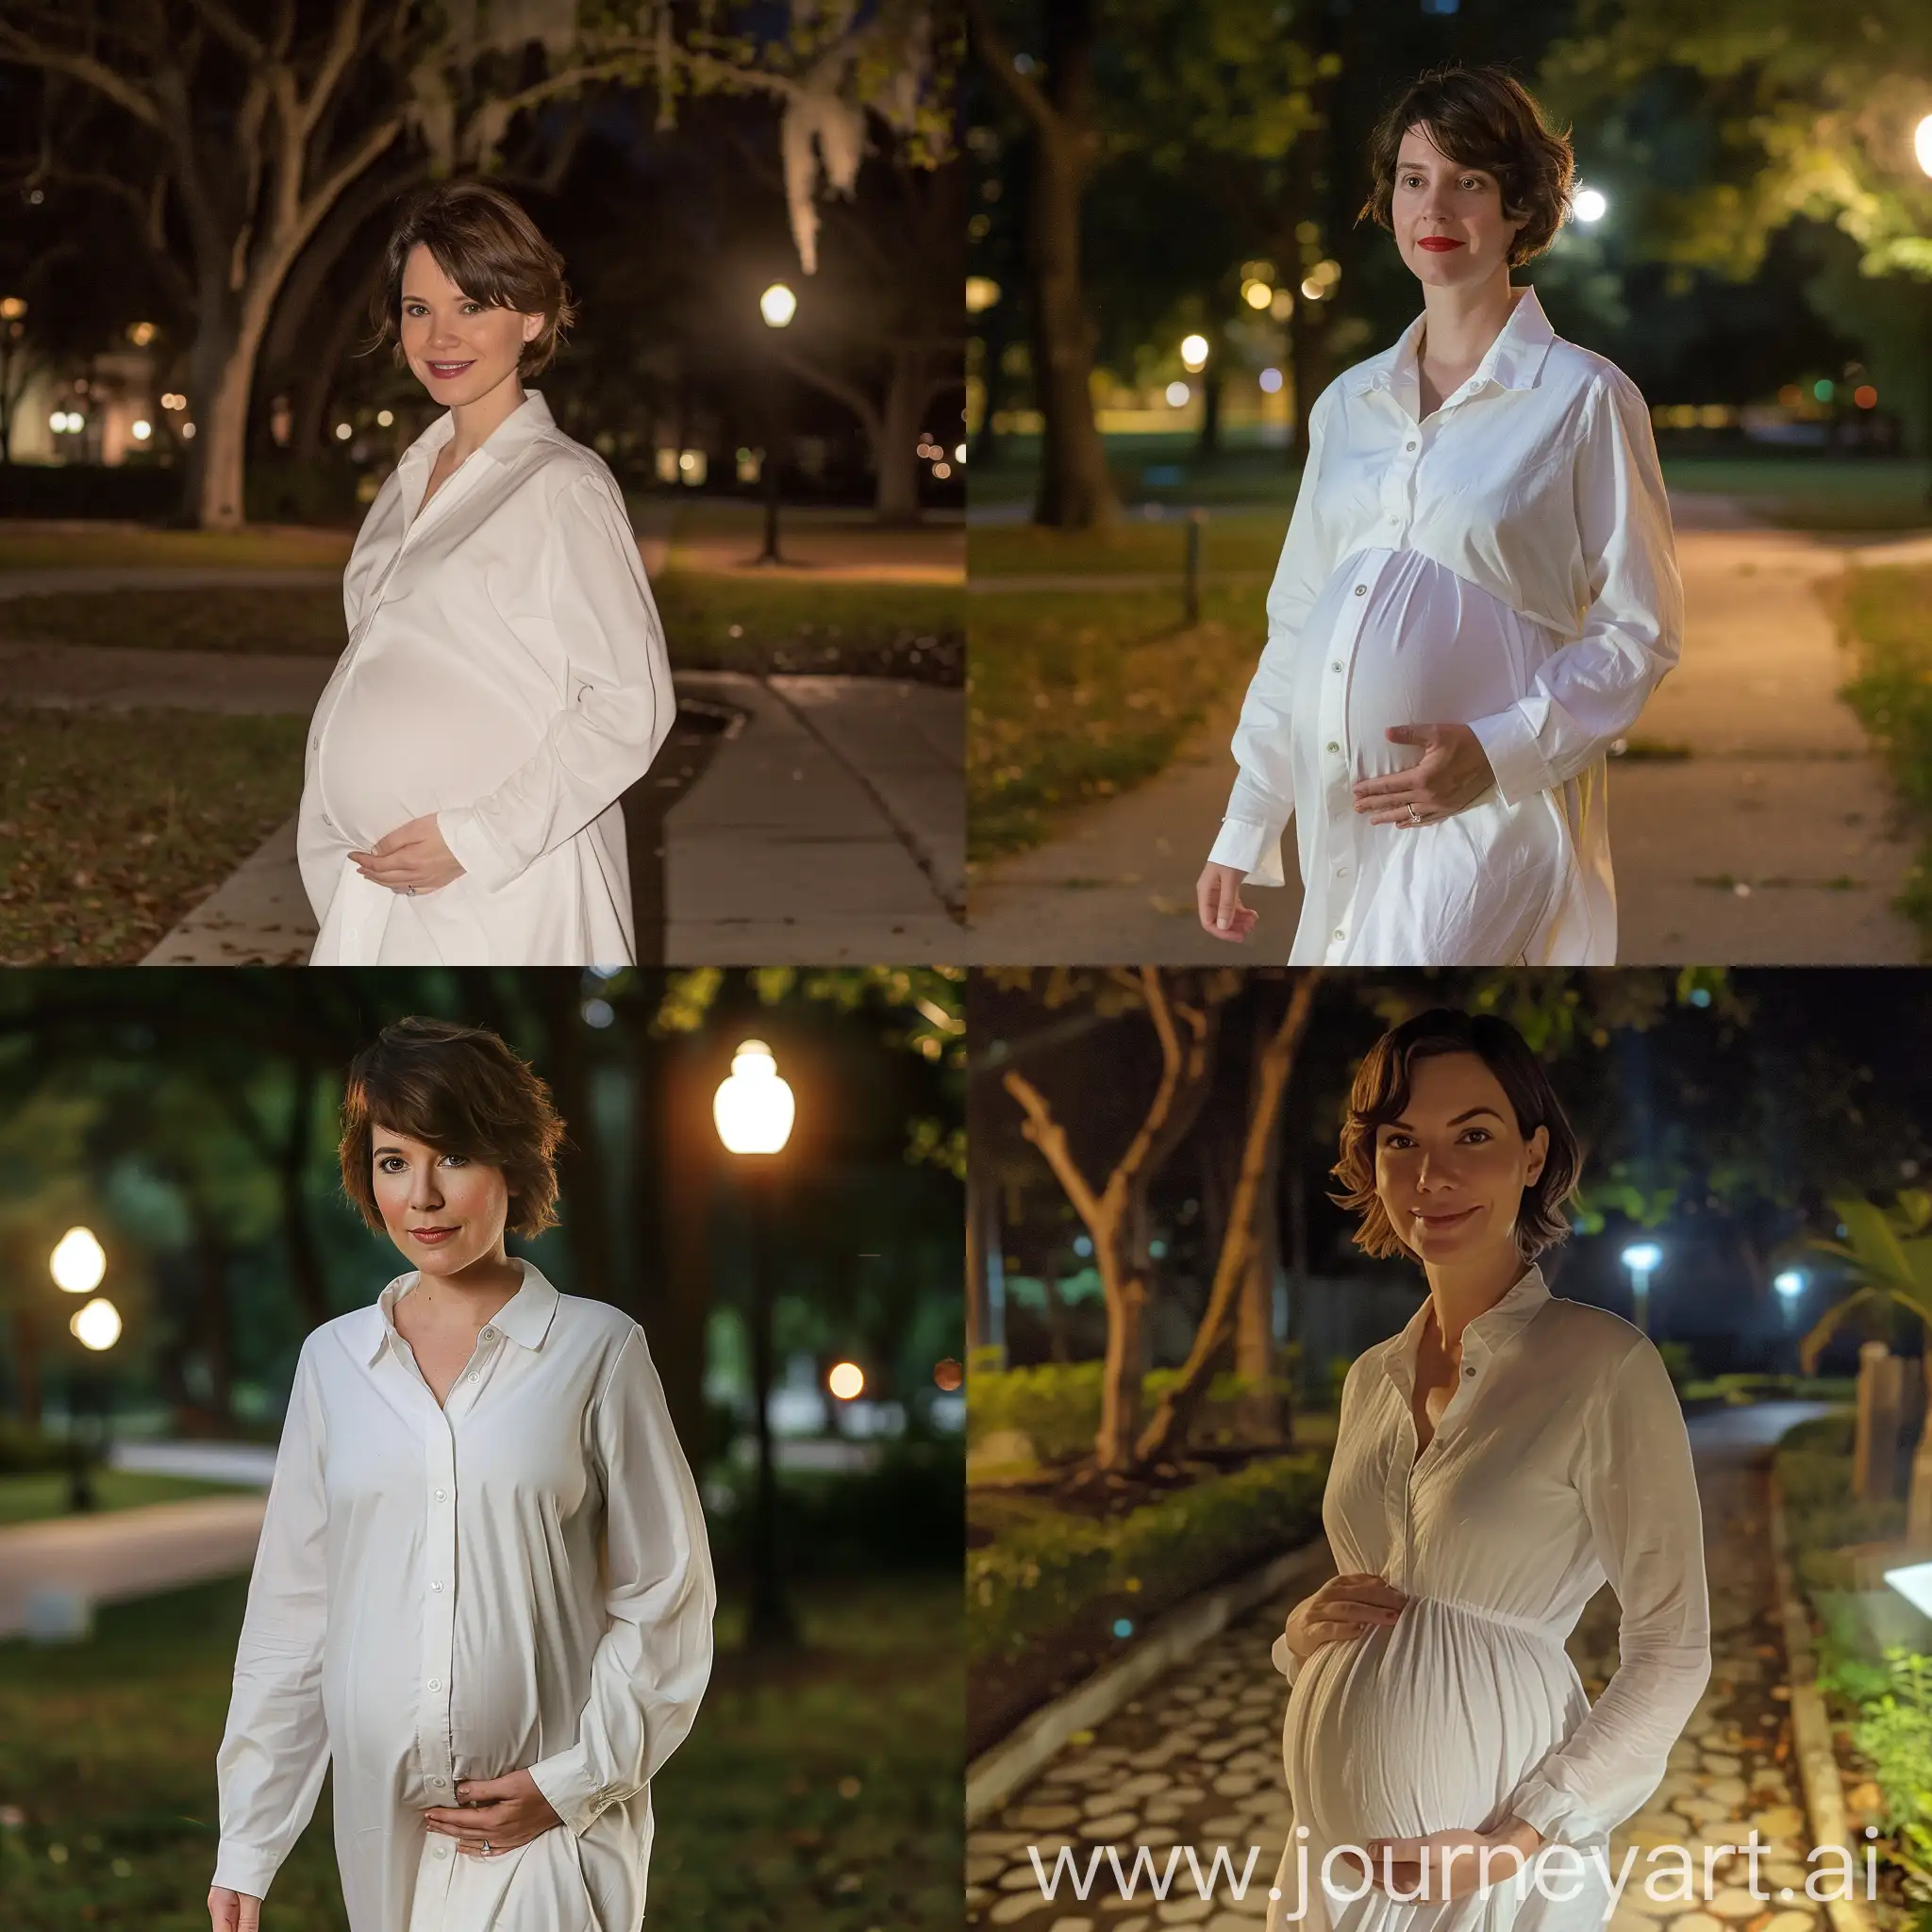 28 year old Tammy Riddle. She is 6'0" in height, Caucasian, Has short brown hair and brown eyes. She wears a white button up gown. She is walking through a park at night, While 9 months pregnant.